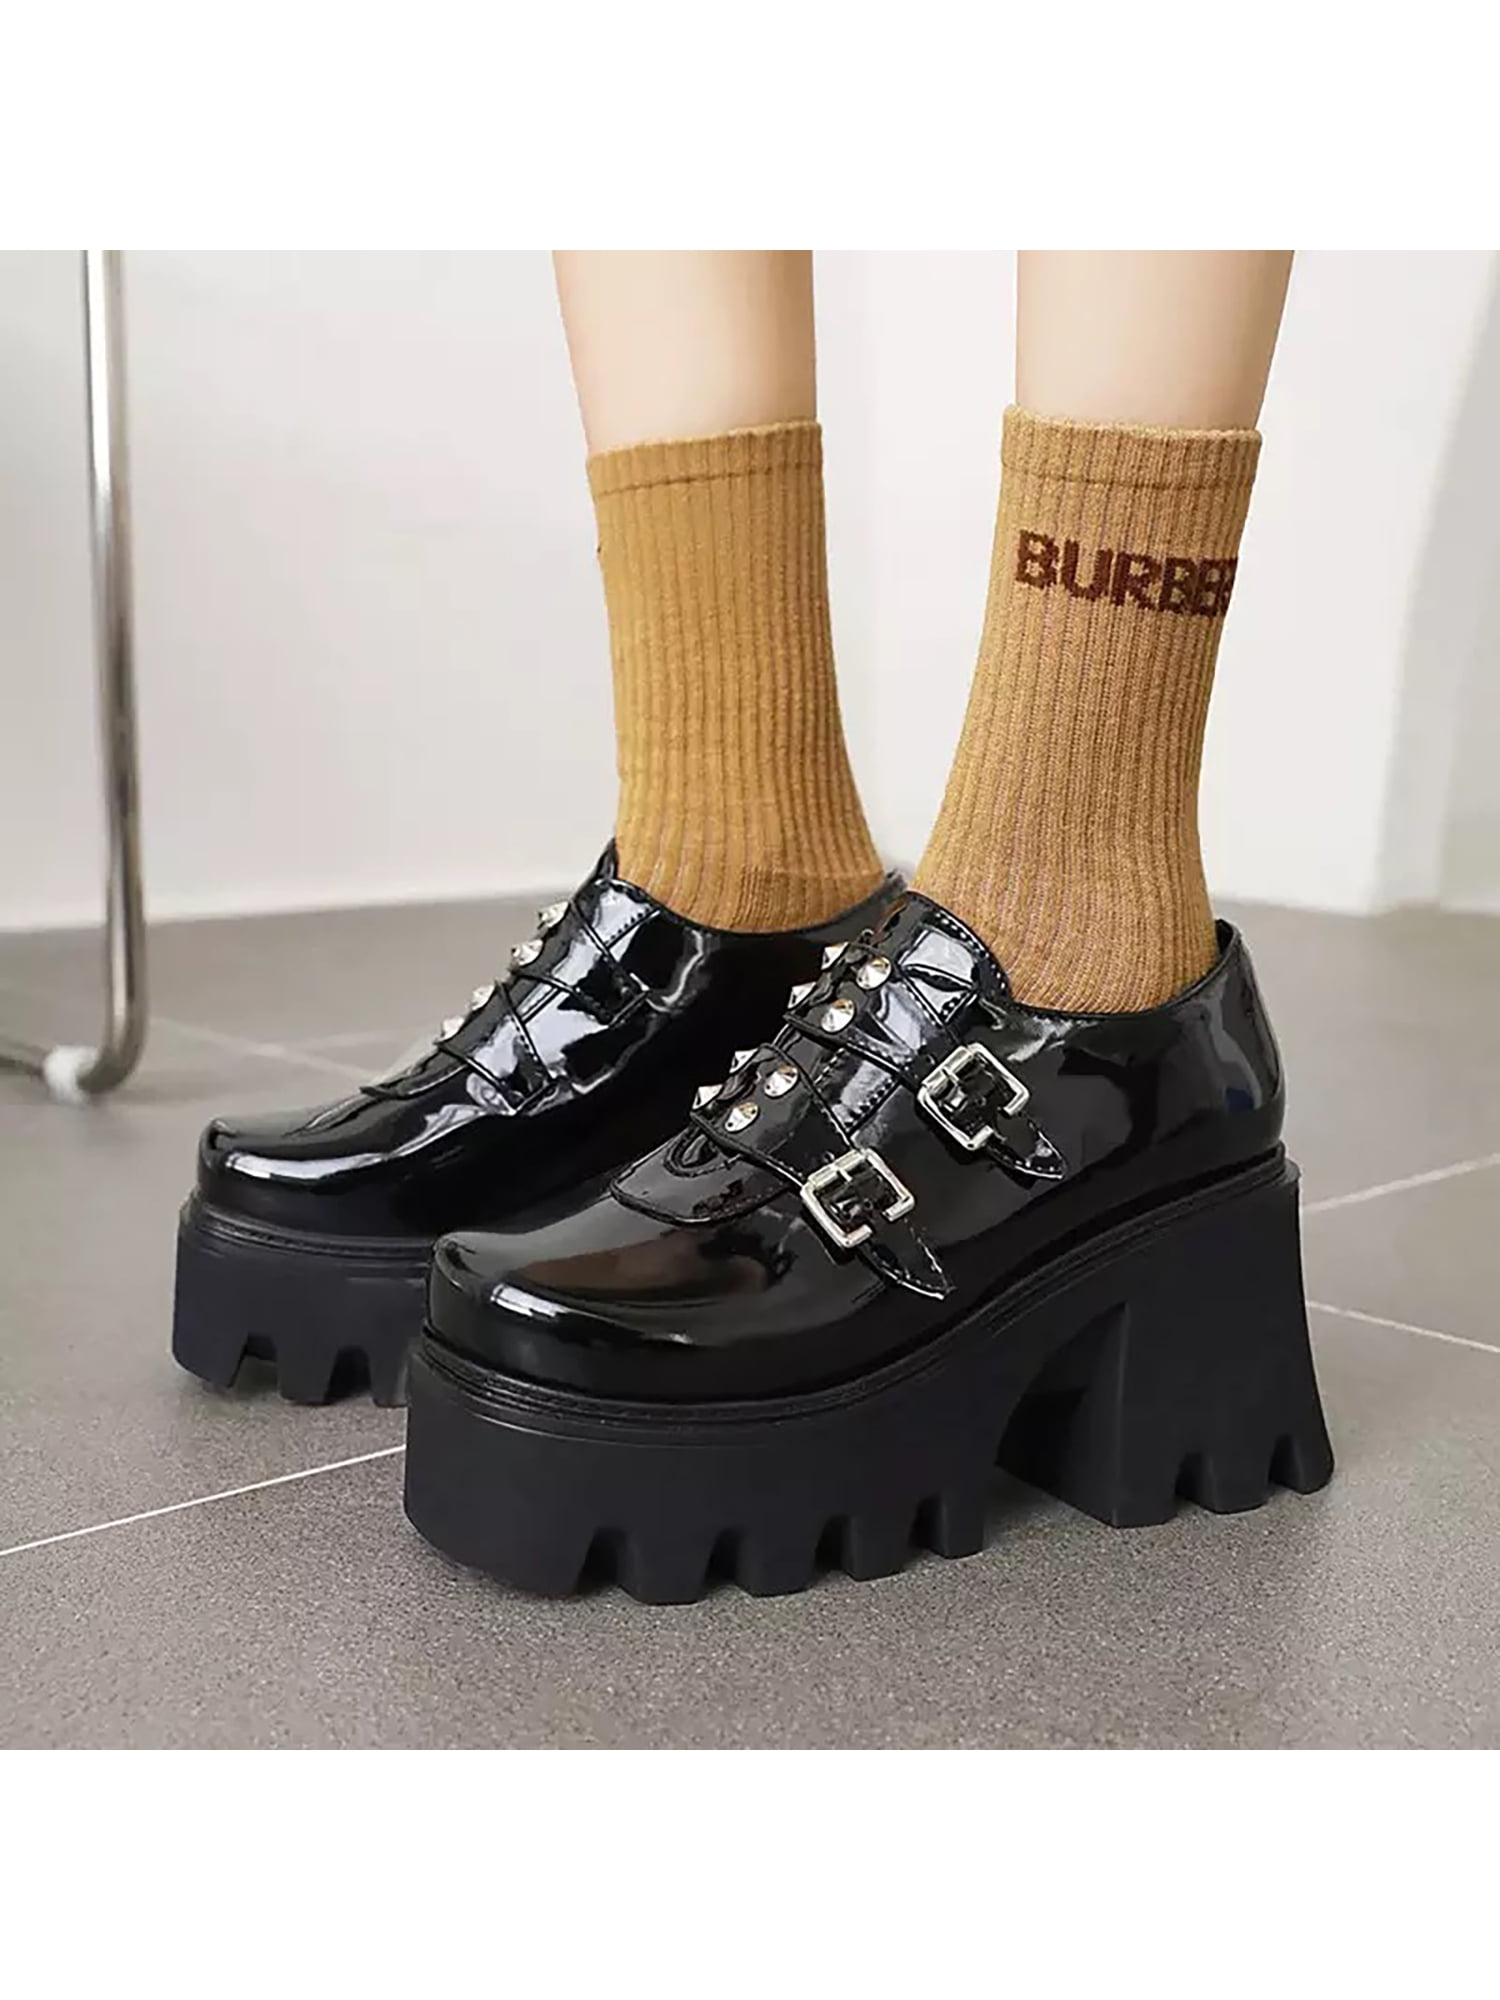 Ladies Women's Punk Ankle Strappy Chunky Platform Lolita Cute Cosplay Shoes Size 